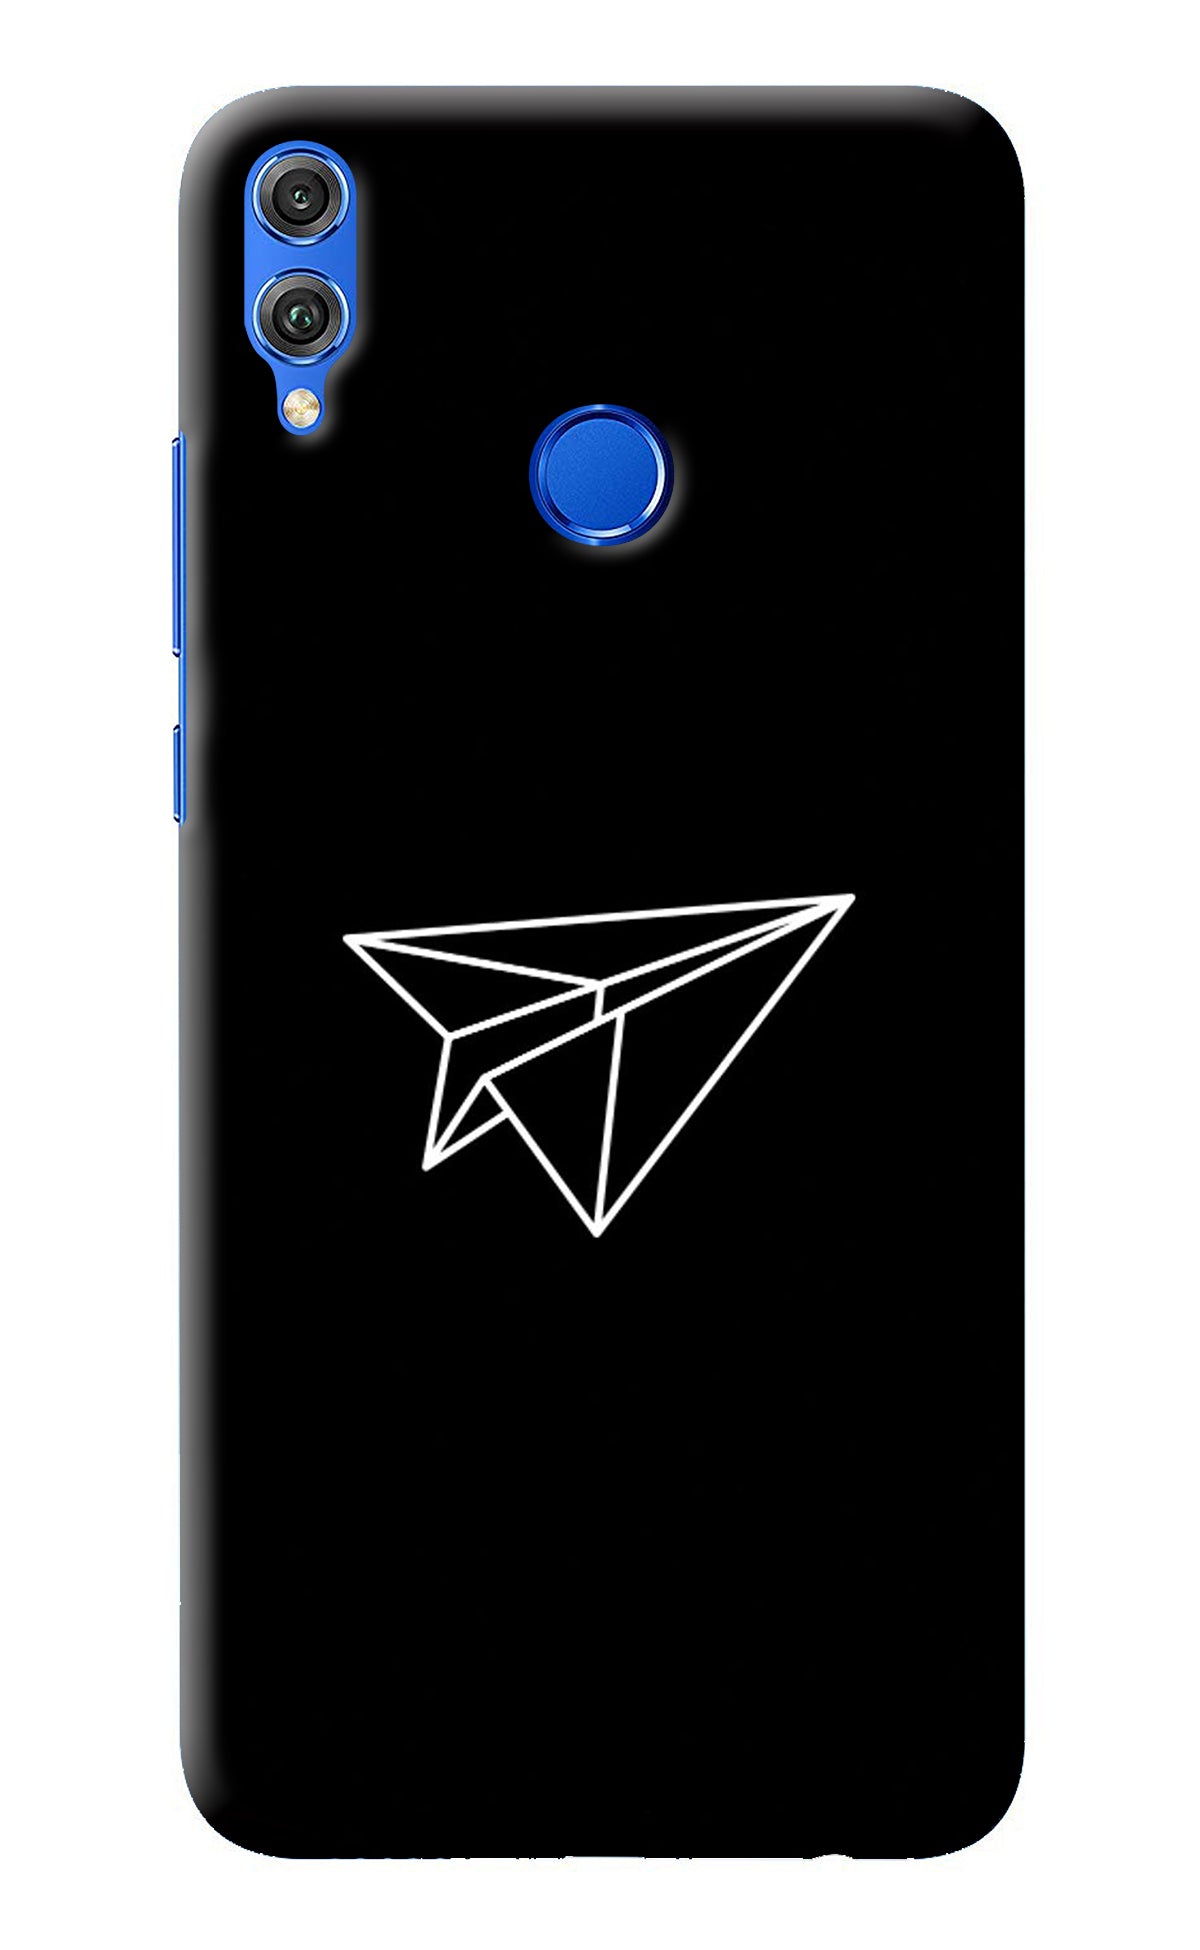 Paper Plane White Honor 8X Back Cover